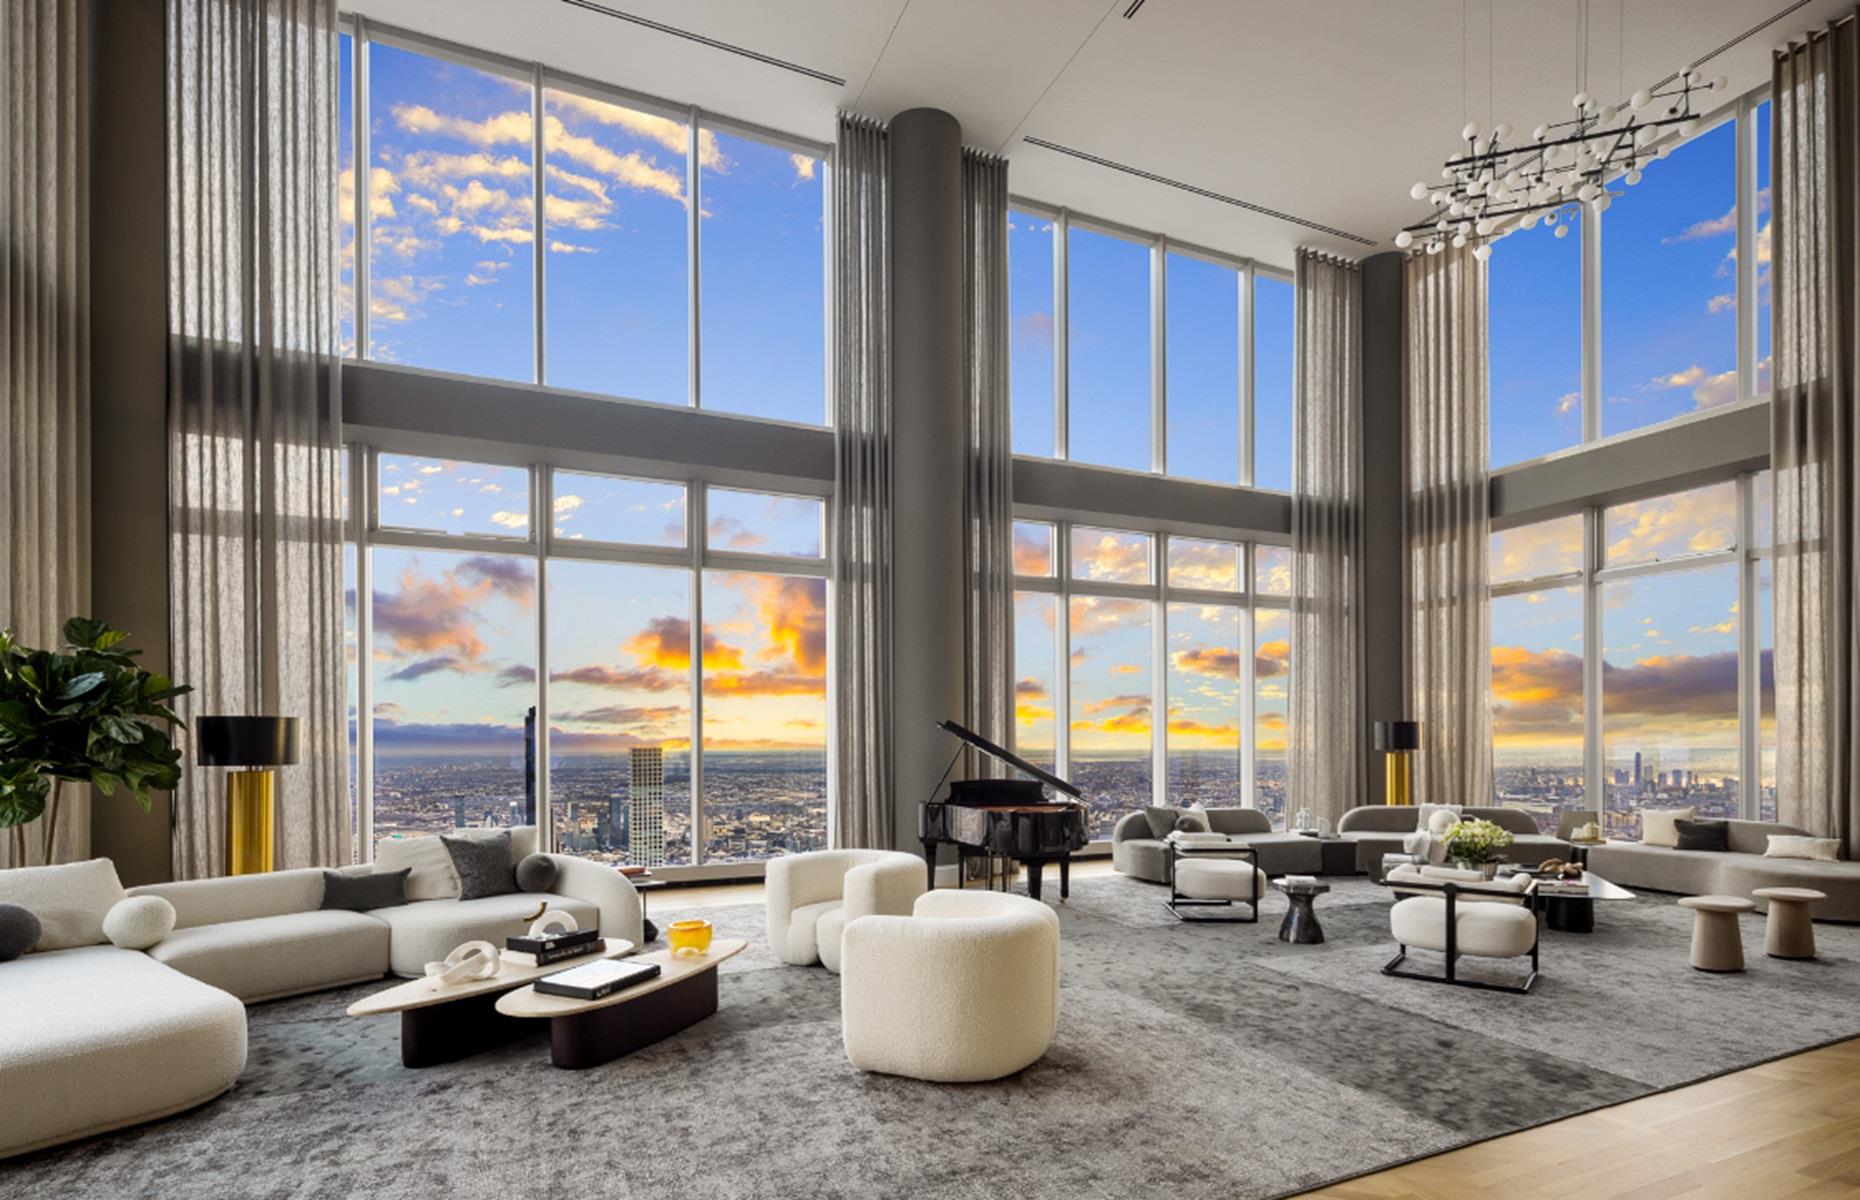 <p>Soaring 1,416 feet above Manhattan, the penthouse is not only the highest residence in the world (it's nearly as tall as the Empire State Building), but it's also America’s most expensive, thanks to its initial asking price of $250 million. Following a price cut, the pad is now available for a cool $195 million. The three-story apartment boasts the highest private ballroom on the planet, alongside this 1,500 square-foot grand salon with its wall-to-wall windows that frame jaw-dropping city scenery. </p>